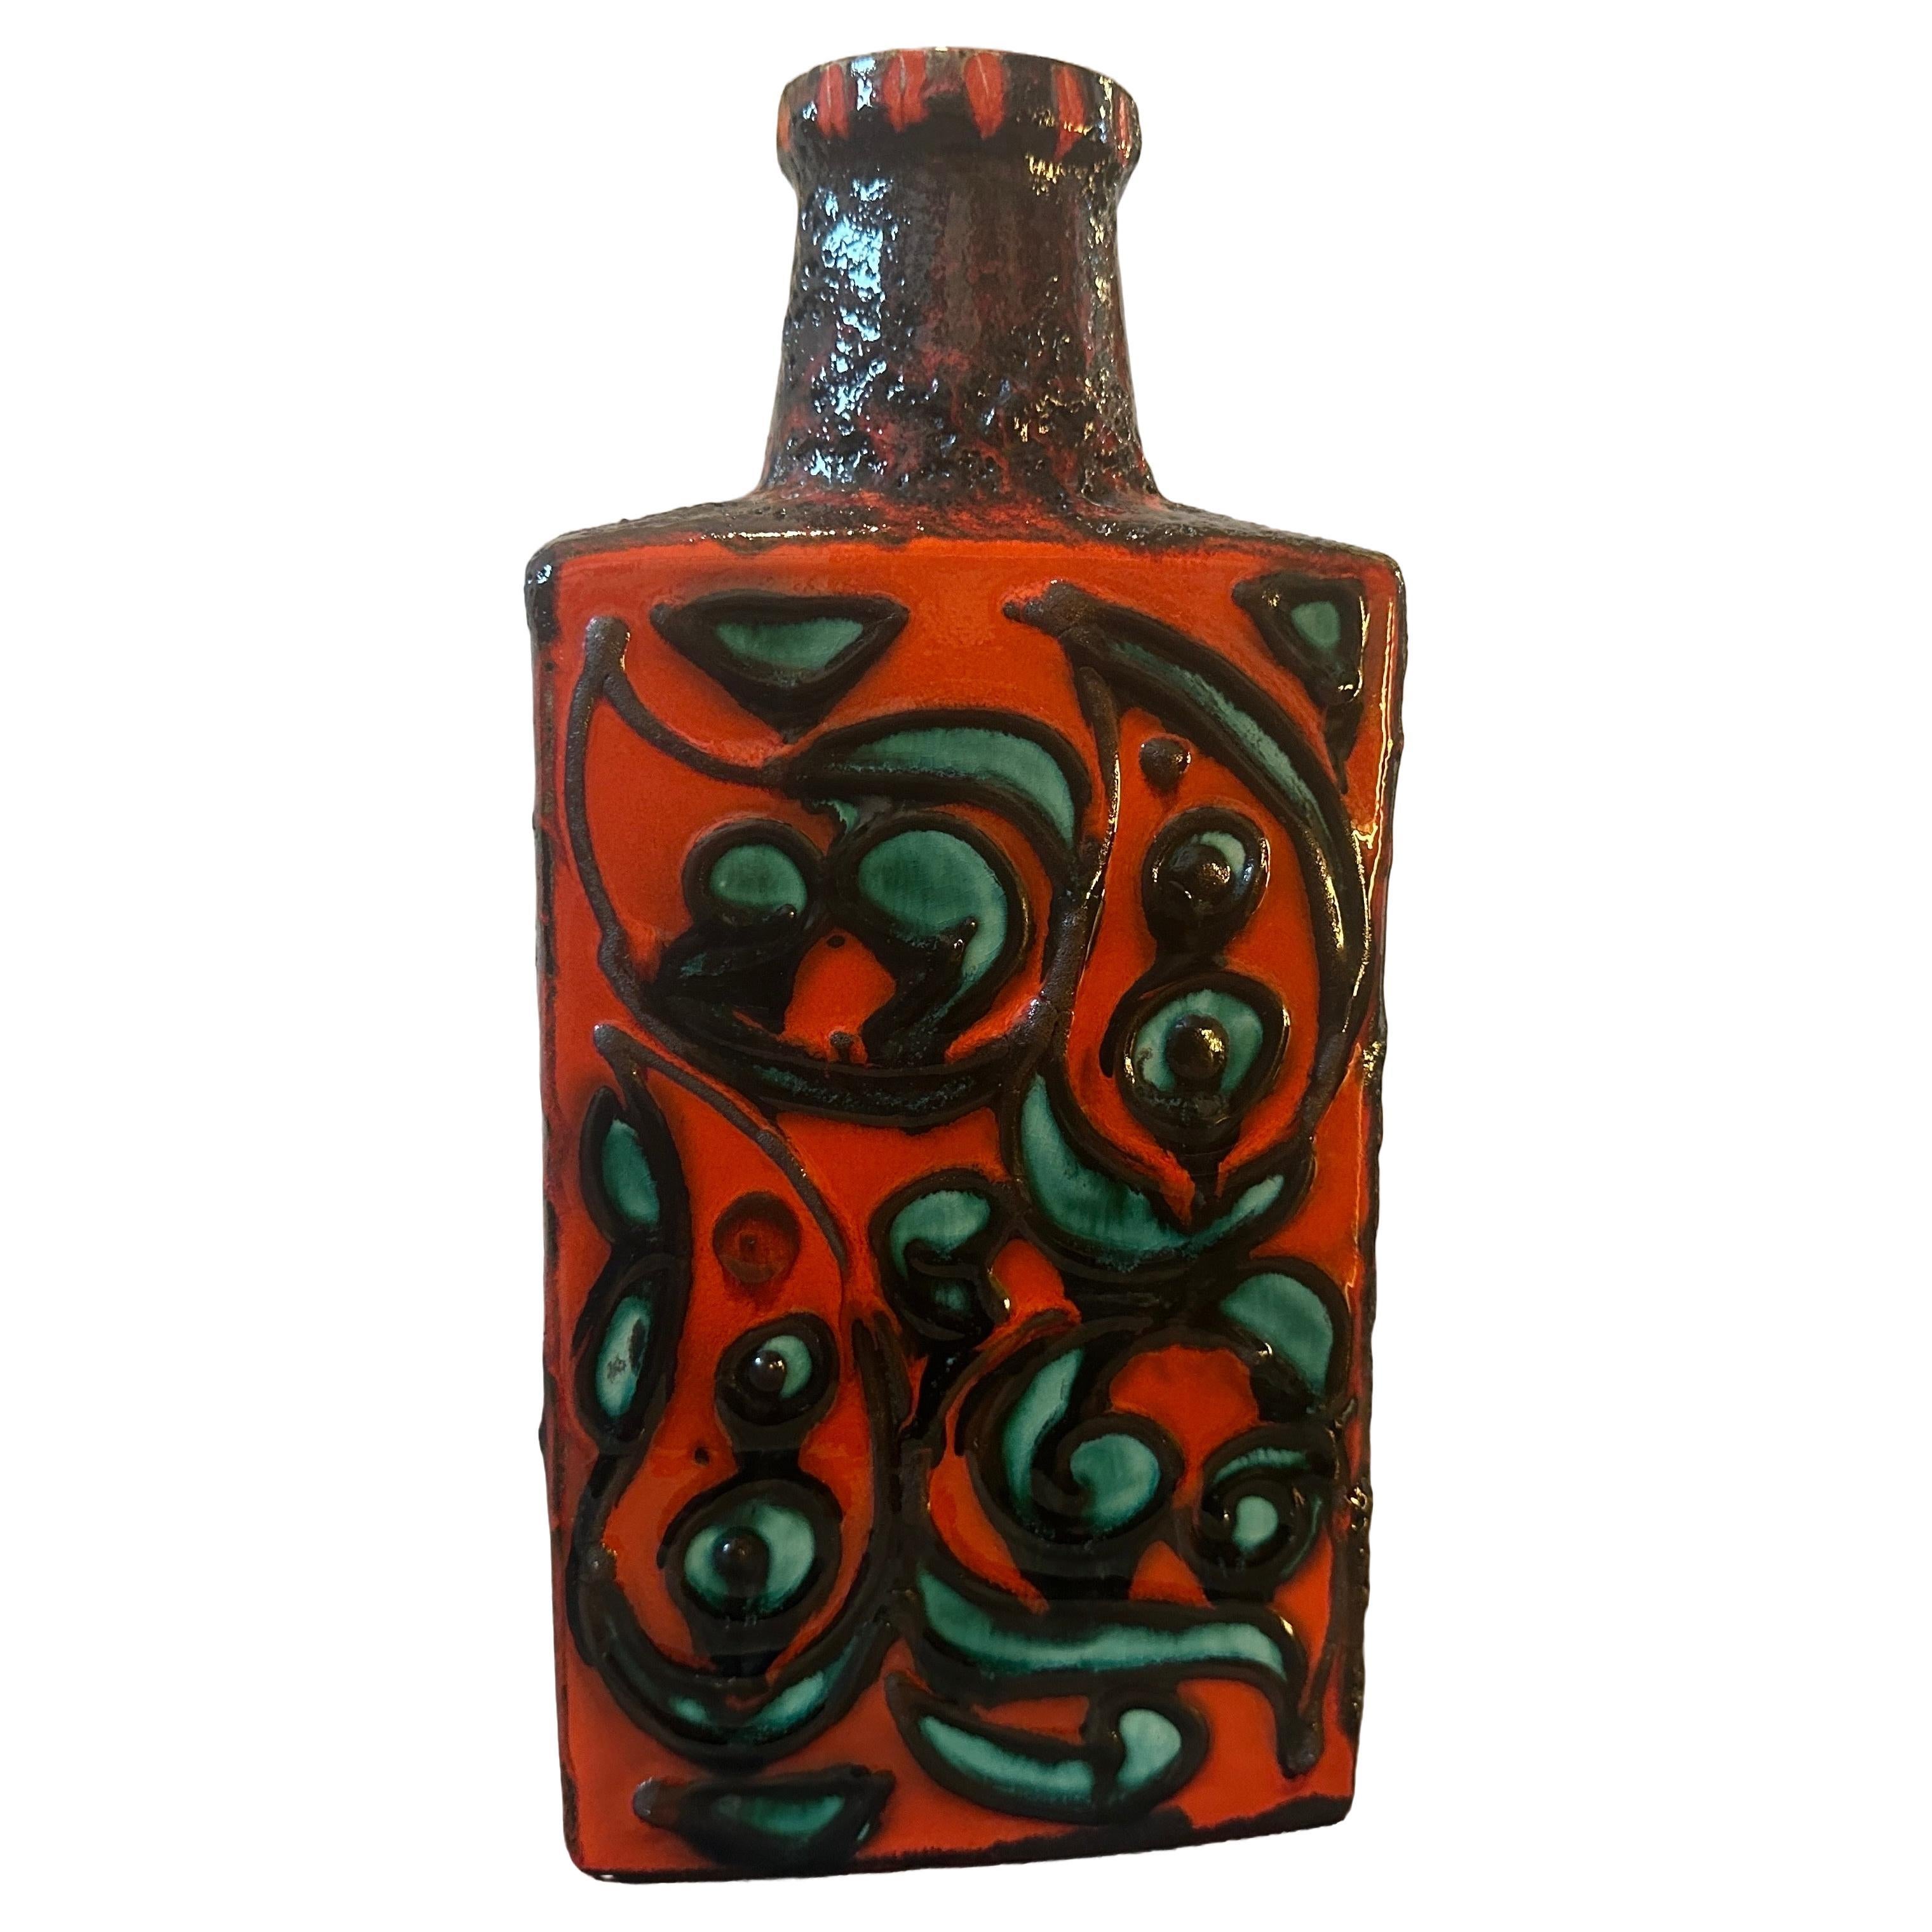 A fat lava ceramic bottle vase designed and manufactured in West Germany in the Seventies by Scheurich, 
This bottle Vase is a striking and iconic piece of ceramic art that captures the essence of the Fat Lava style, a popular trend in West German